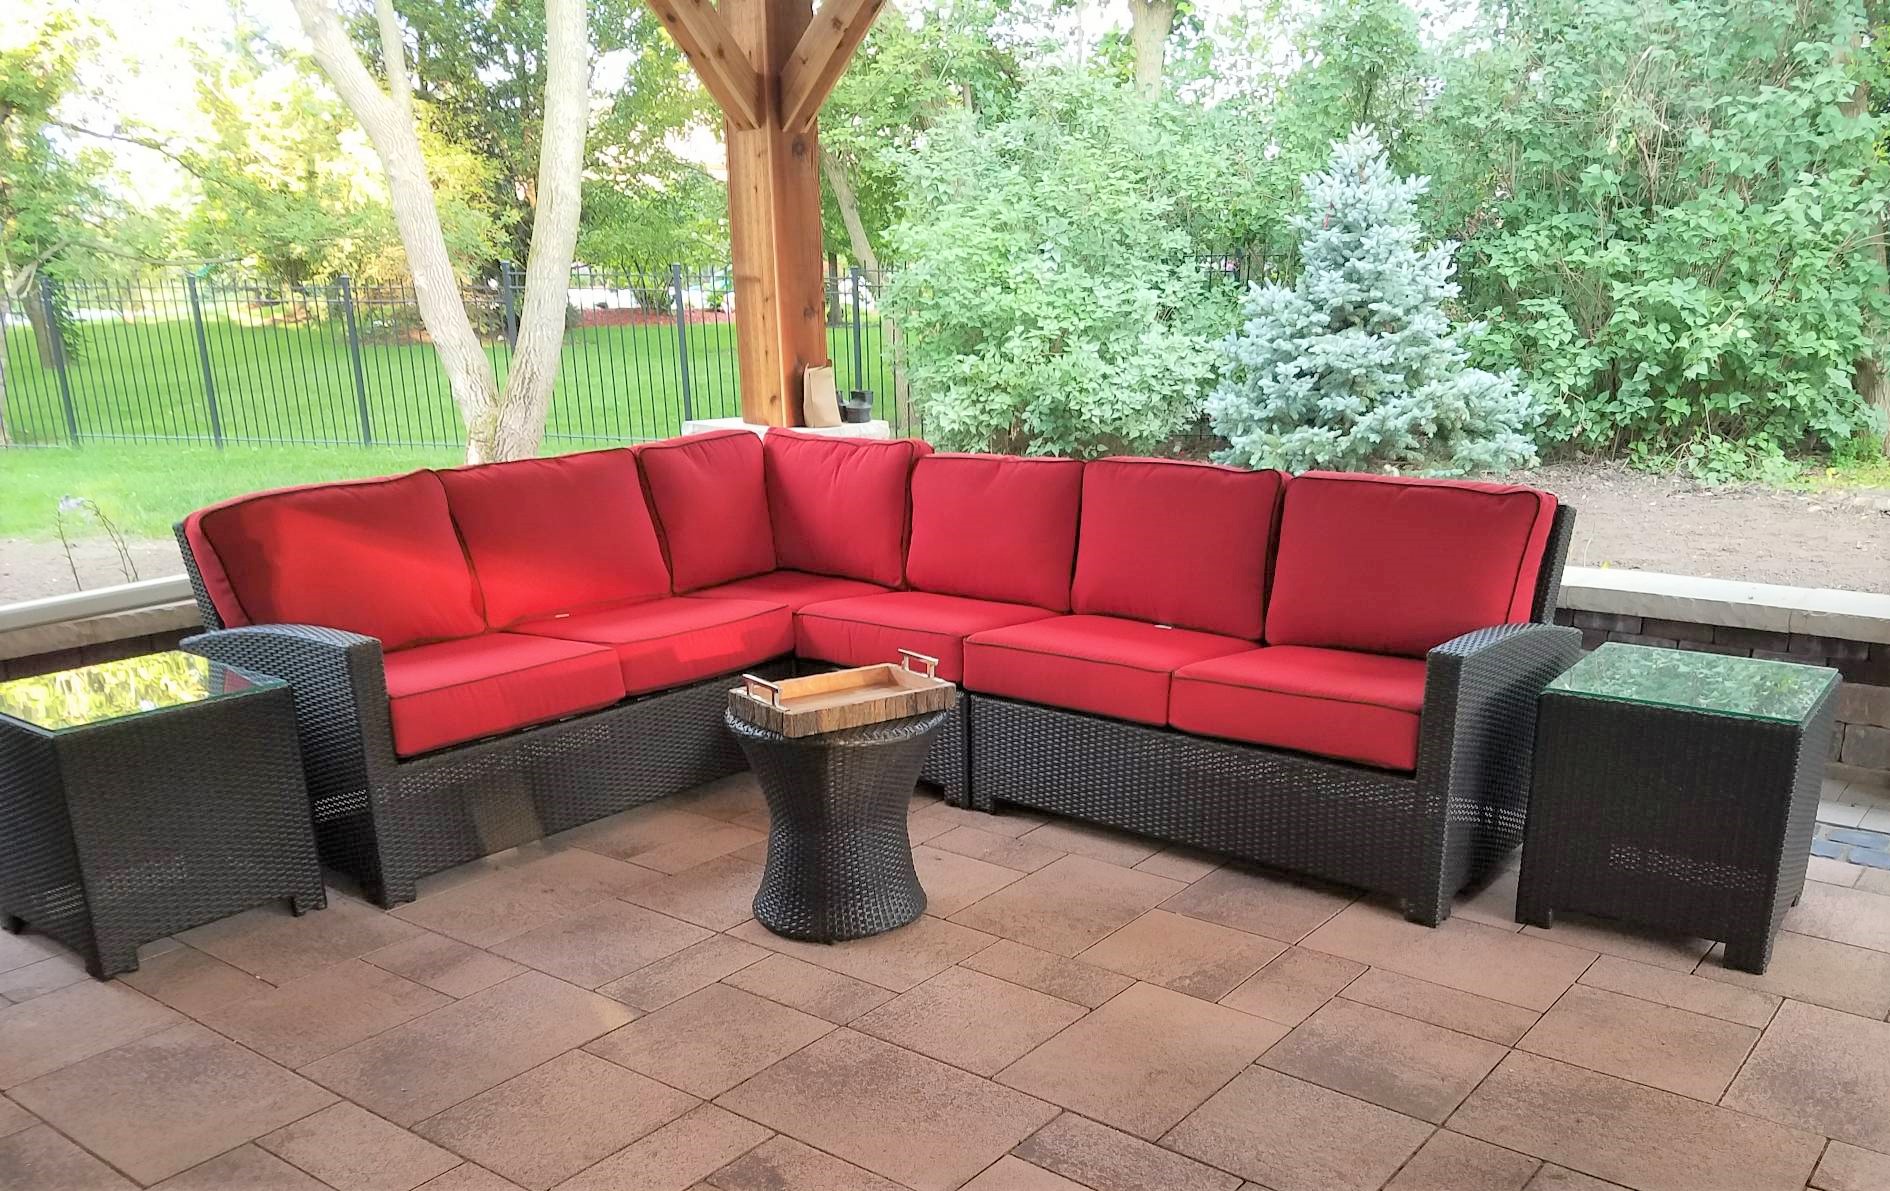 Transmotion Delivery Assembly Installaion Relocation Chicago IL Chicago Wicker Sable 8-piece group Great Escape 1 Patio furniture outside fun summer red sable